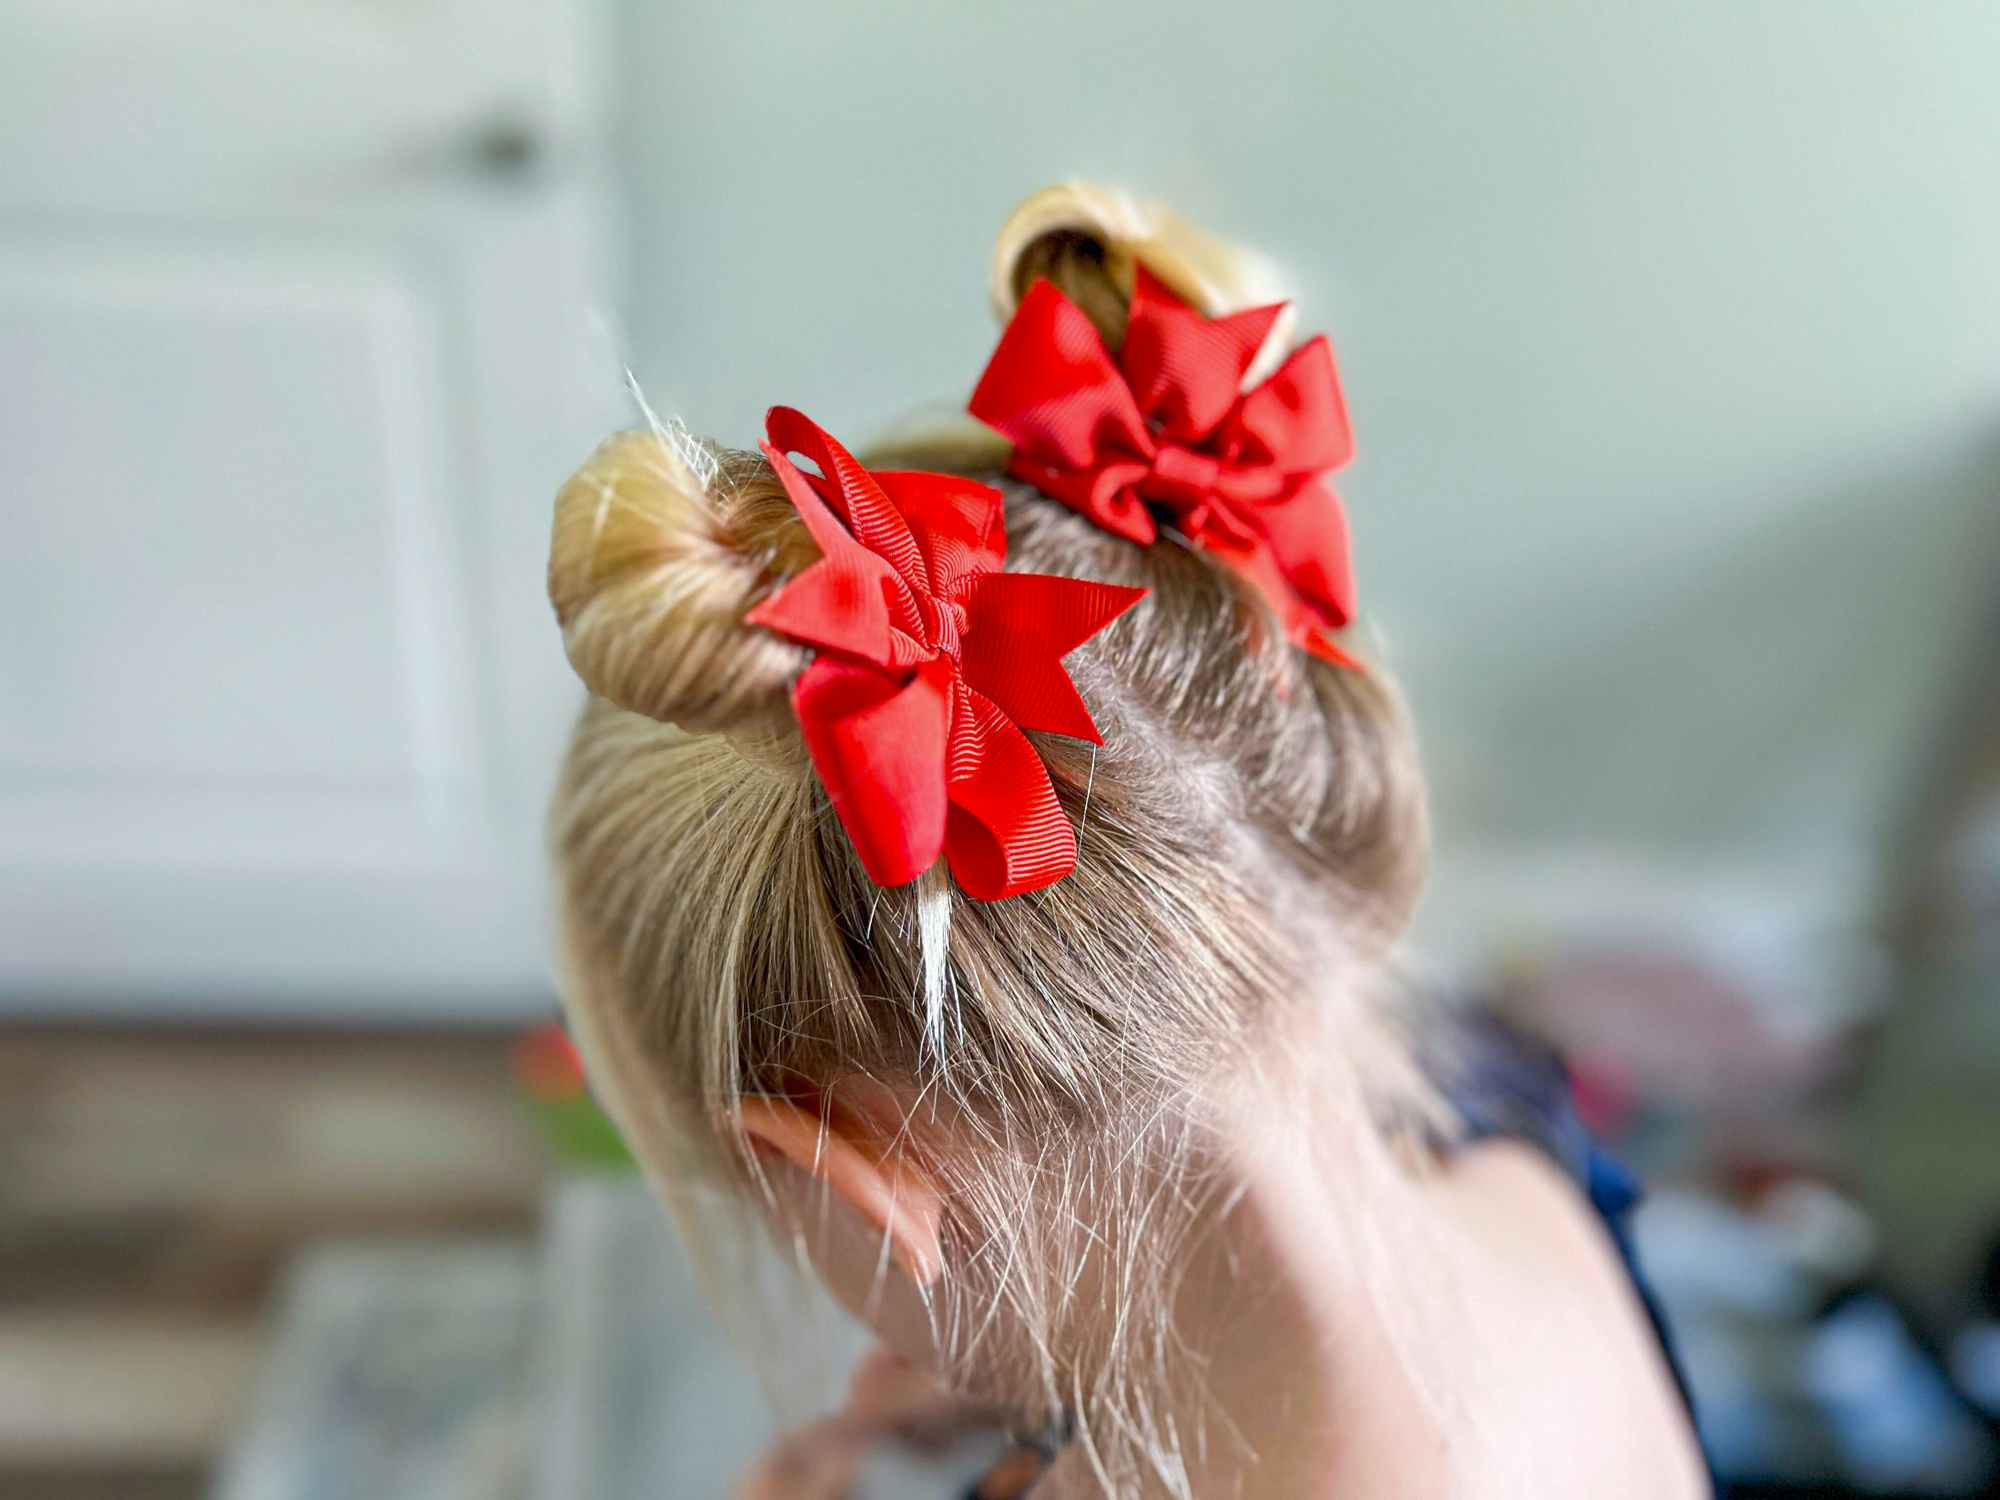 A little girl showing off her hairstyle - two high buns with big red bows